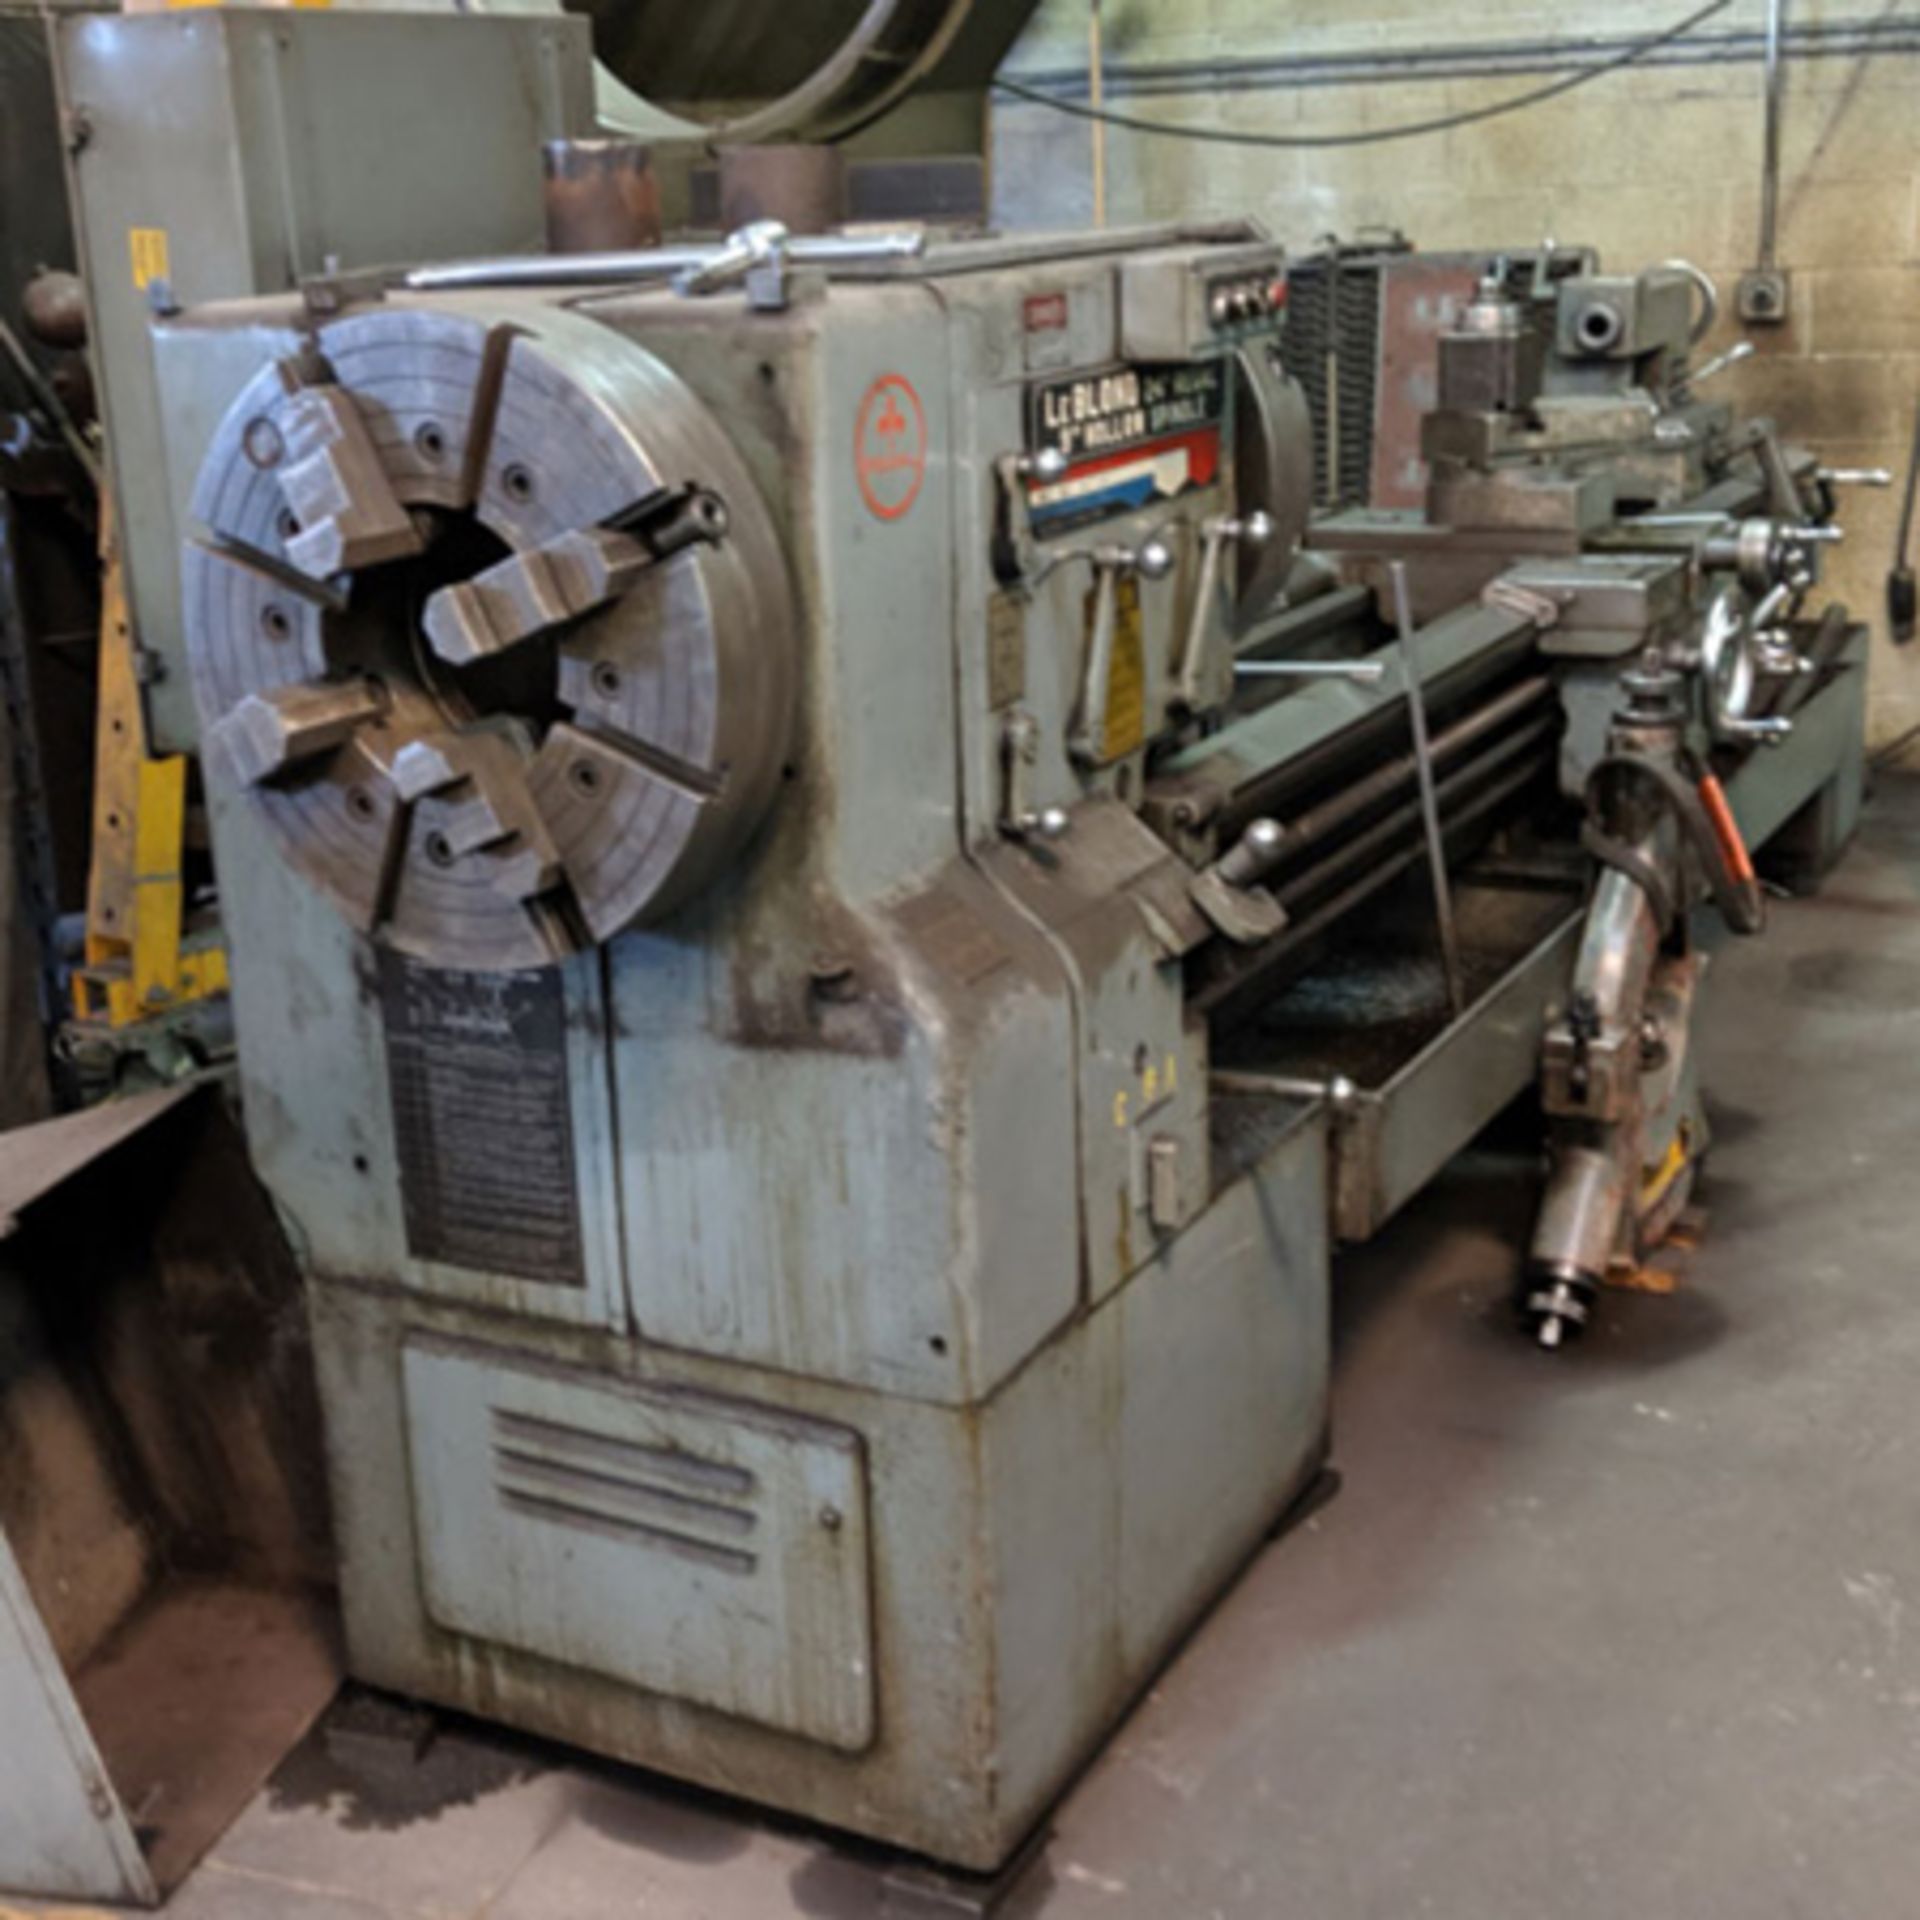 LEBLOND ENGINE LATHE MDL REGAL, 25" SWING BY 86" CENTERS - Image 7 of 12